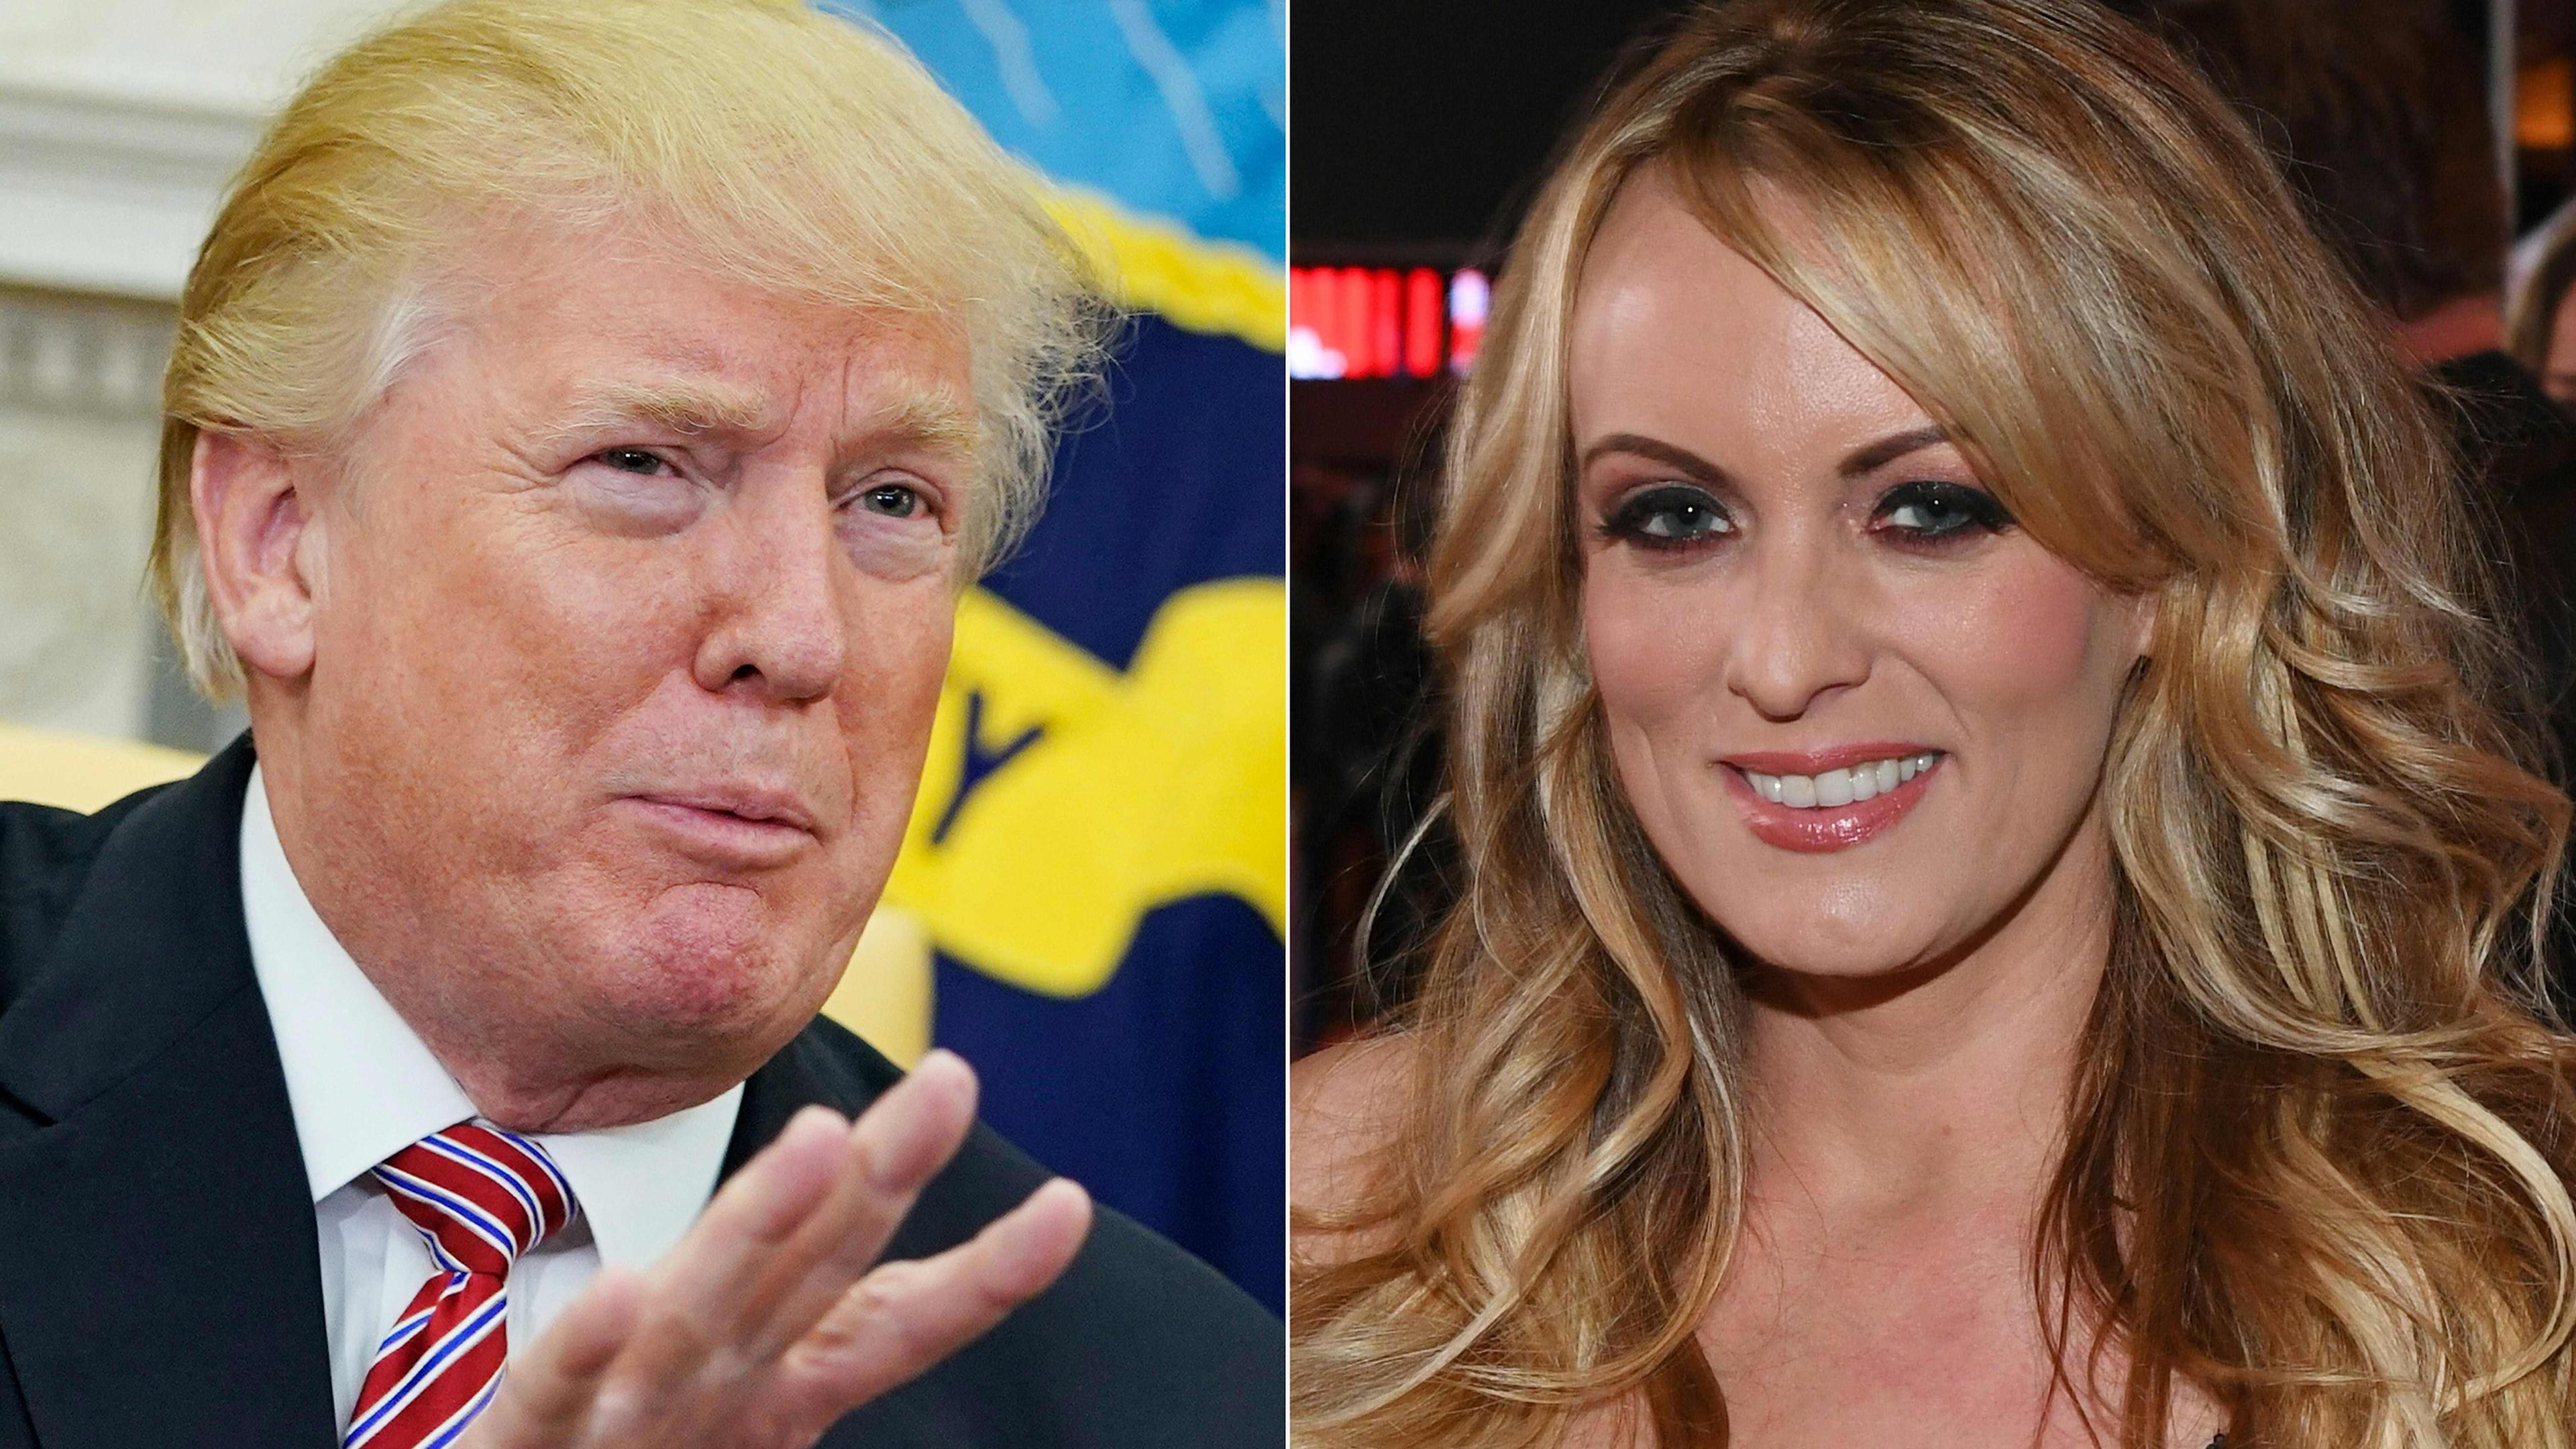 (COMBO) This combination of file pictures created on February 14, 2018, shows US President Donald Trump responding to a reporter's question in the Oval Office of the White House in Washington, DC, and adult film actress/director Stormy Daniels attending the 2018 Adult Video News Awards at the Hard Rock Hotel & Casino January 27, 2018 in Las Vegas, Nevada. - Stormy Daniels is a onetime porn star who has approached her growing role in US political history with character and wit -- though her feud with Donald Trump has come with a price.
The adult film actress has done battle with the former president for several years, alleging in 2018 that the two had a sexual relationship the long-ago summer of 2006. (Photo by MANDEL NGAN and Ethan Miller / various sources / AFP)